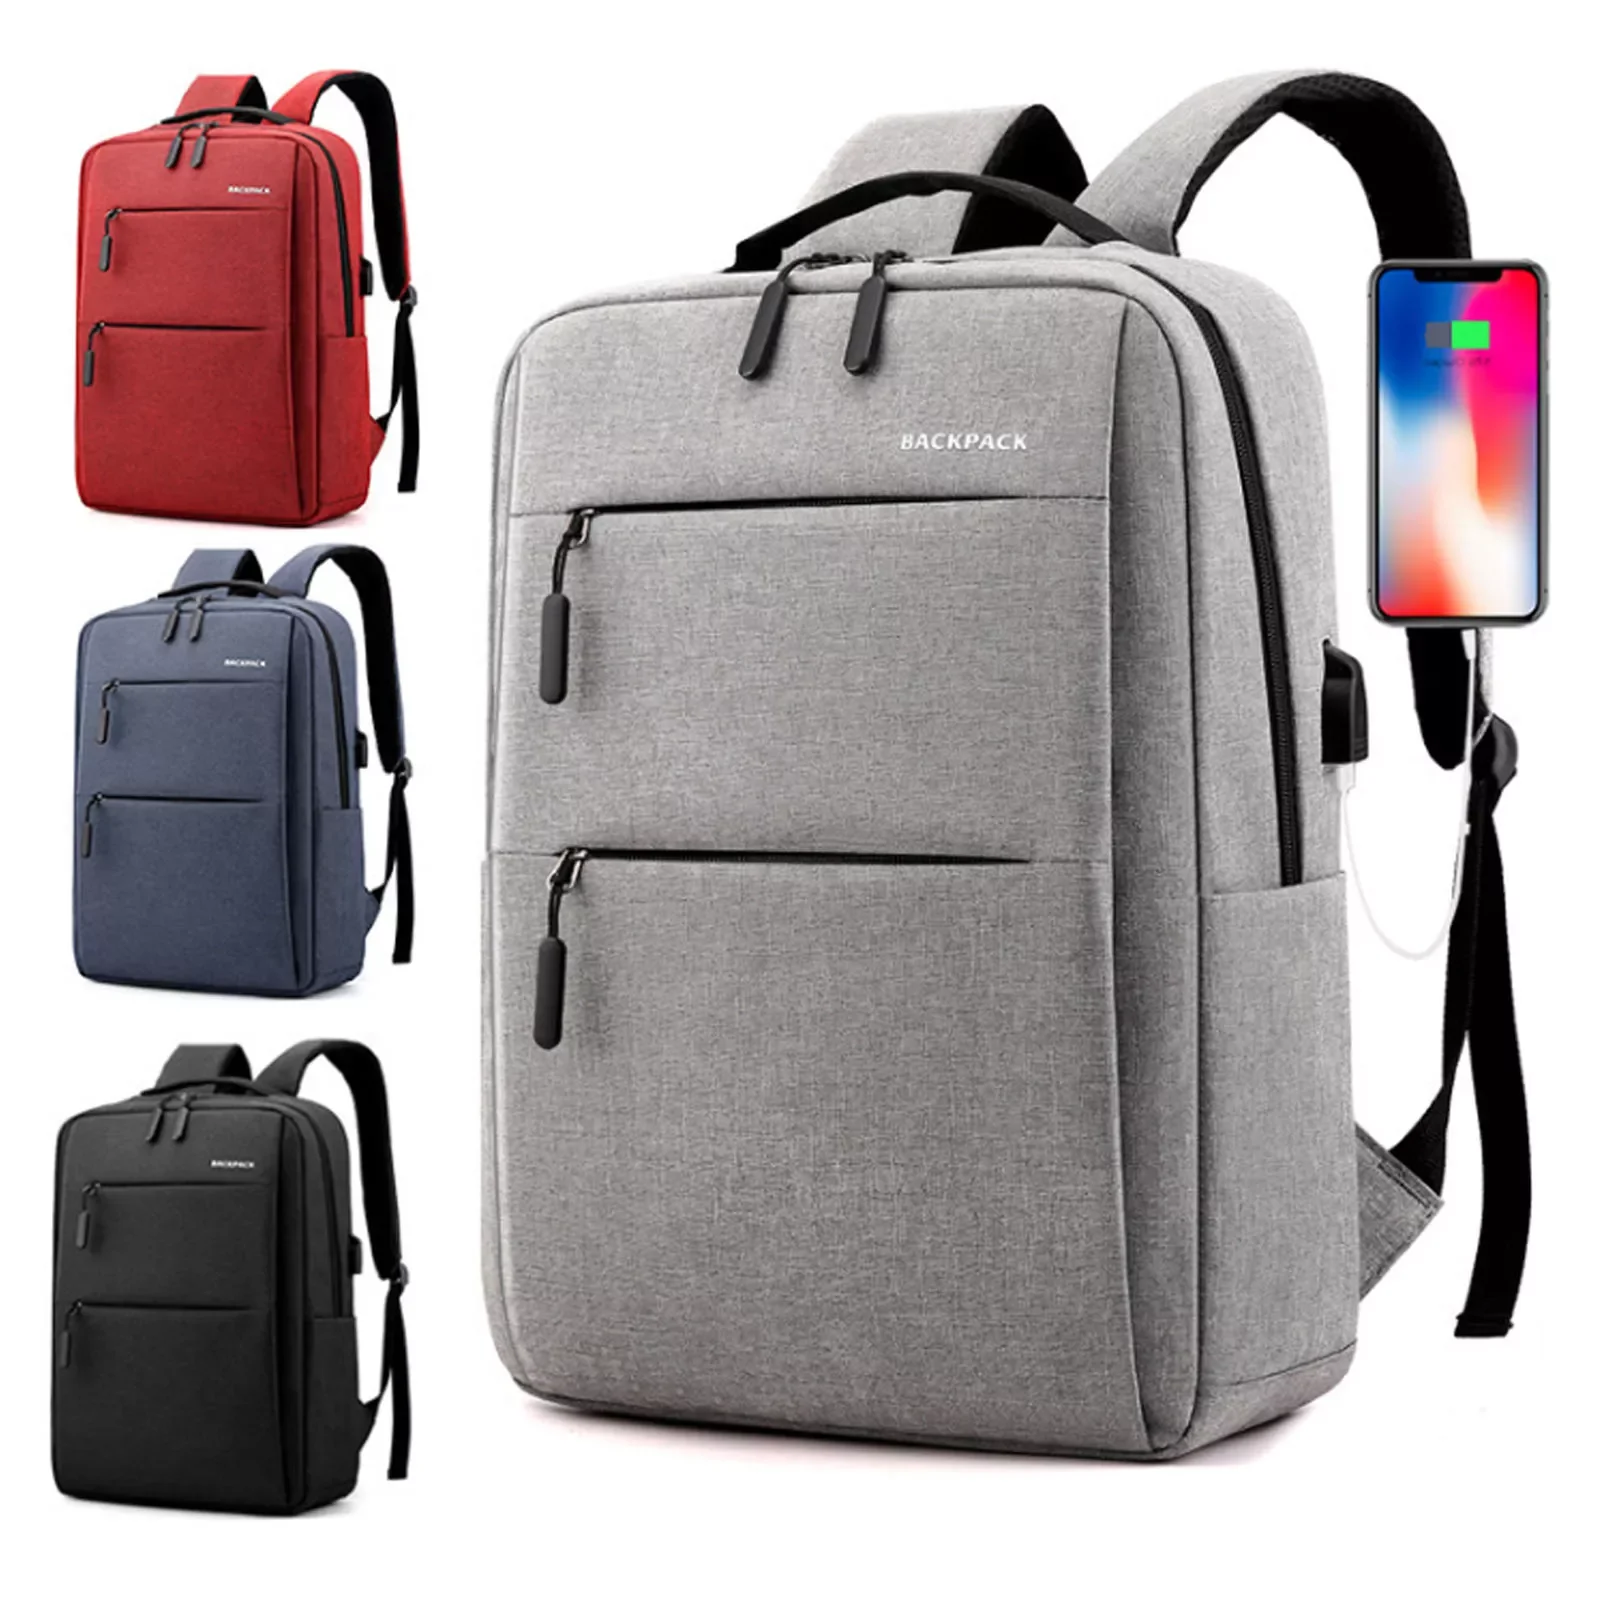 

Besegad Large Capacity Laptop Backpack Travel Schoolbag with USB Charging Port for 15.6 Inch Notebook Business Rechargeable Bag